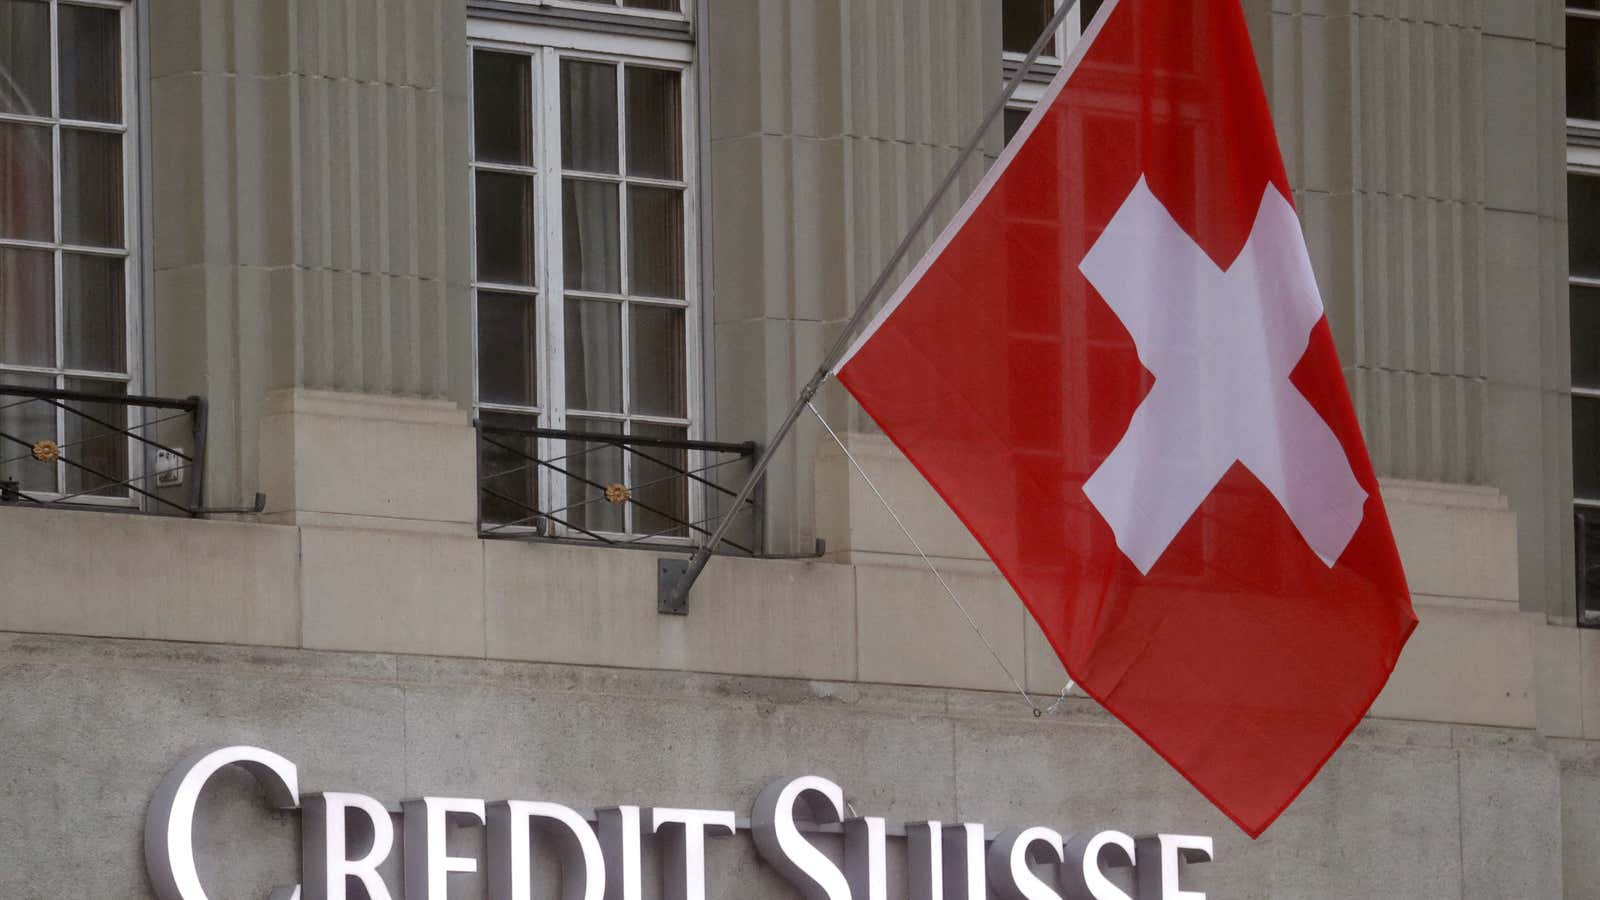 Credit Suisse posted its worst loss in 15 years